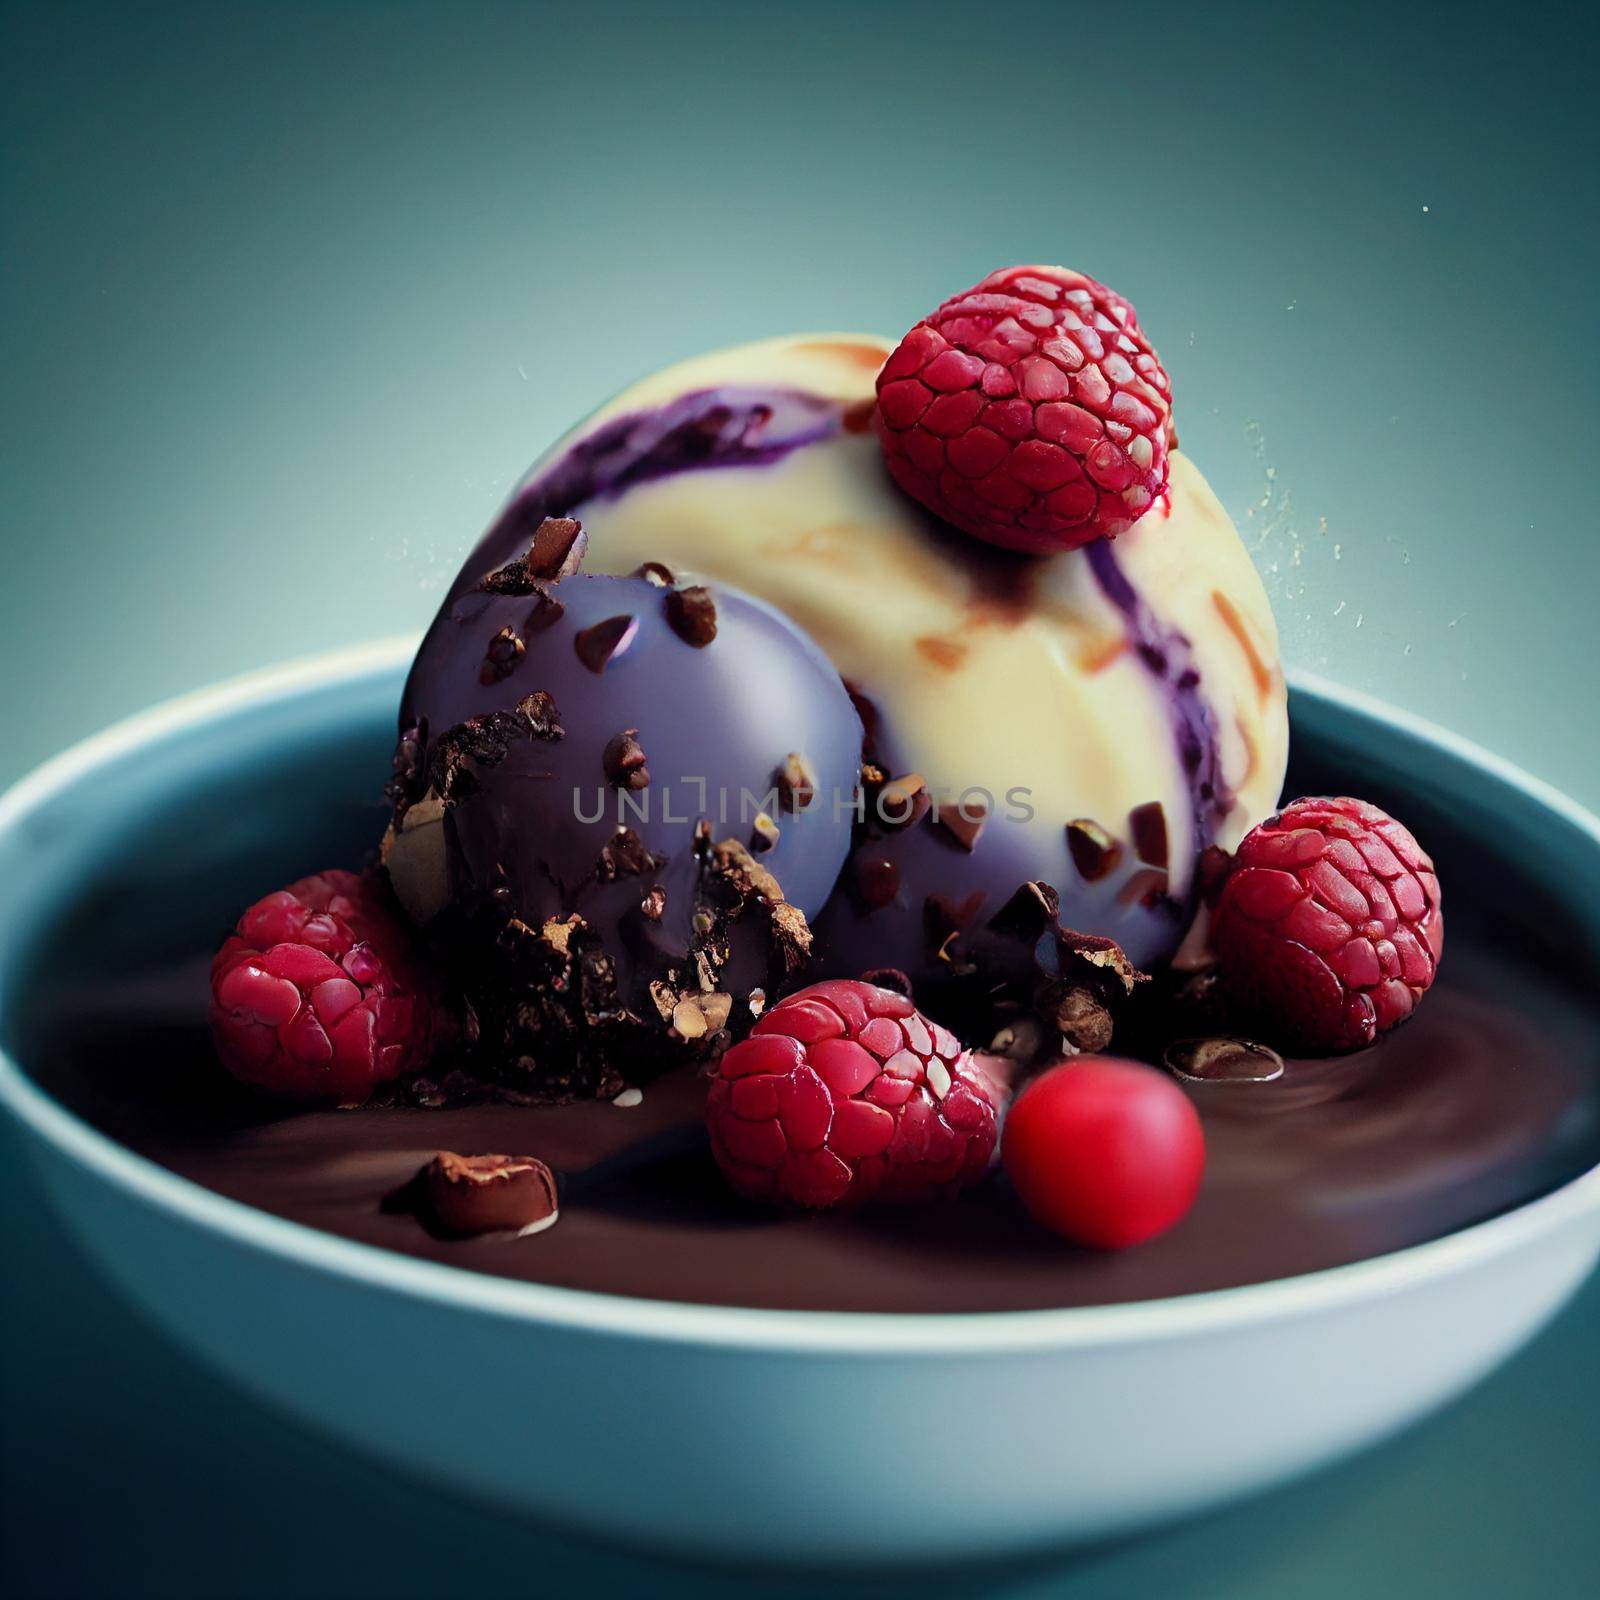 Photorealistic 3d illustration icecream scoop in a bowl, berries and melted chocolate.